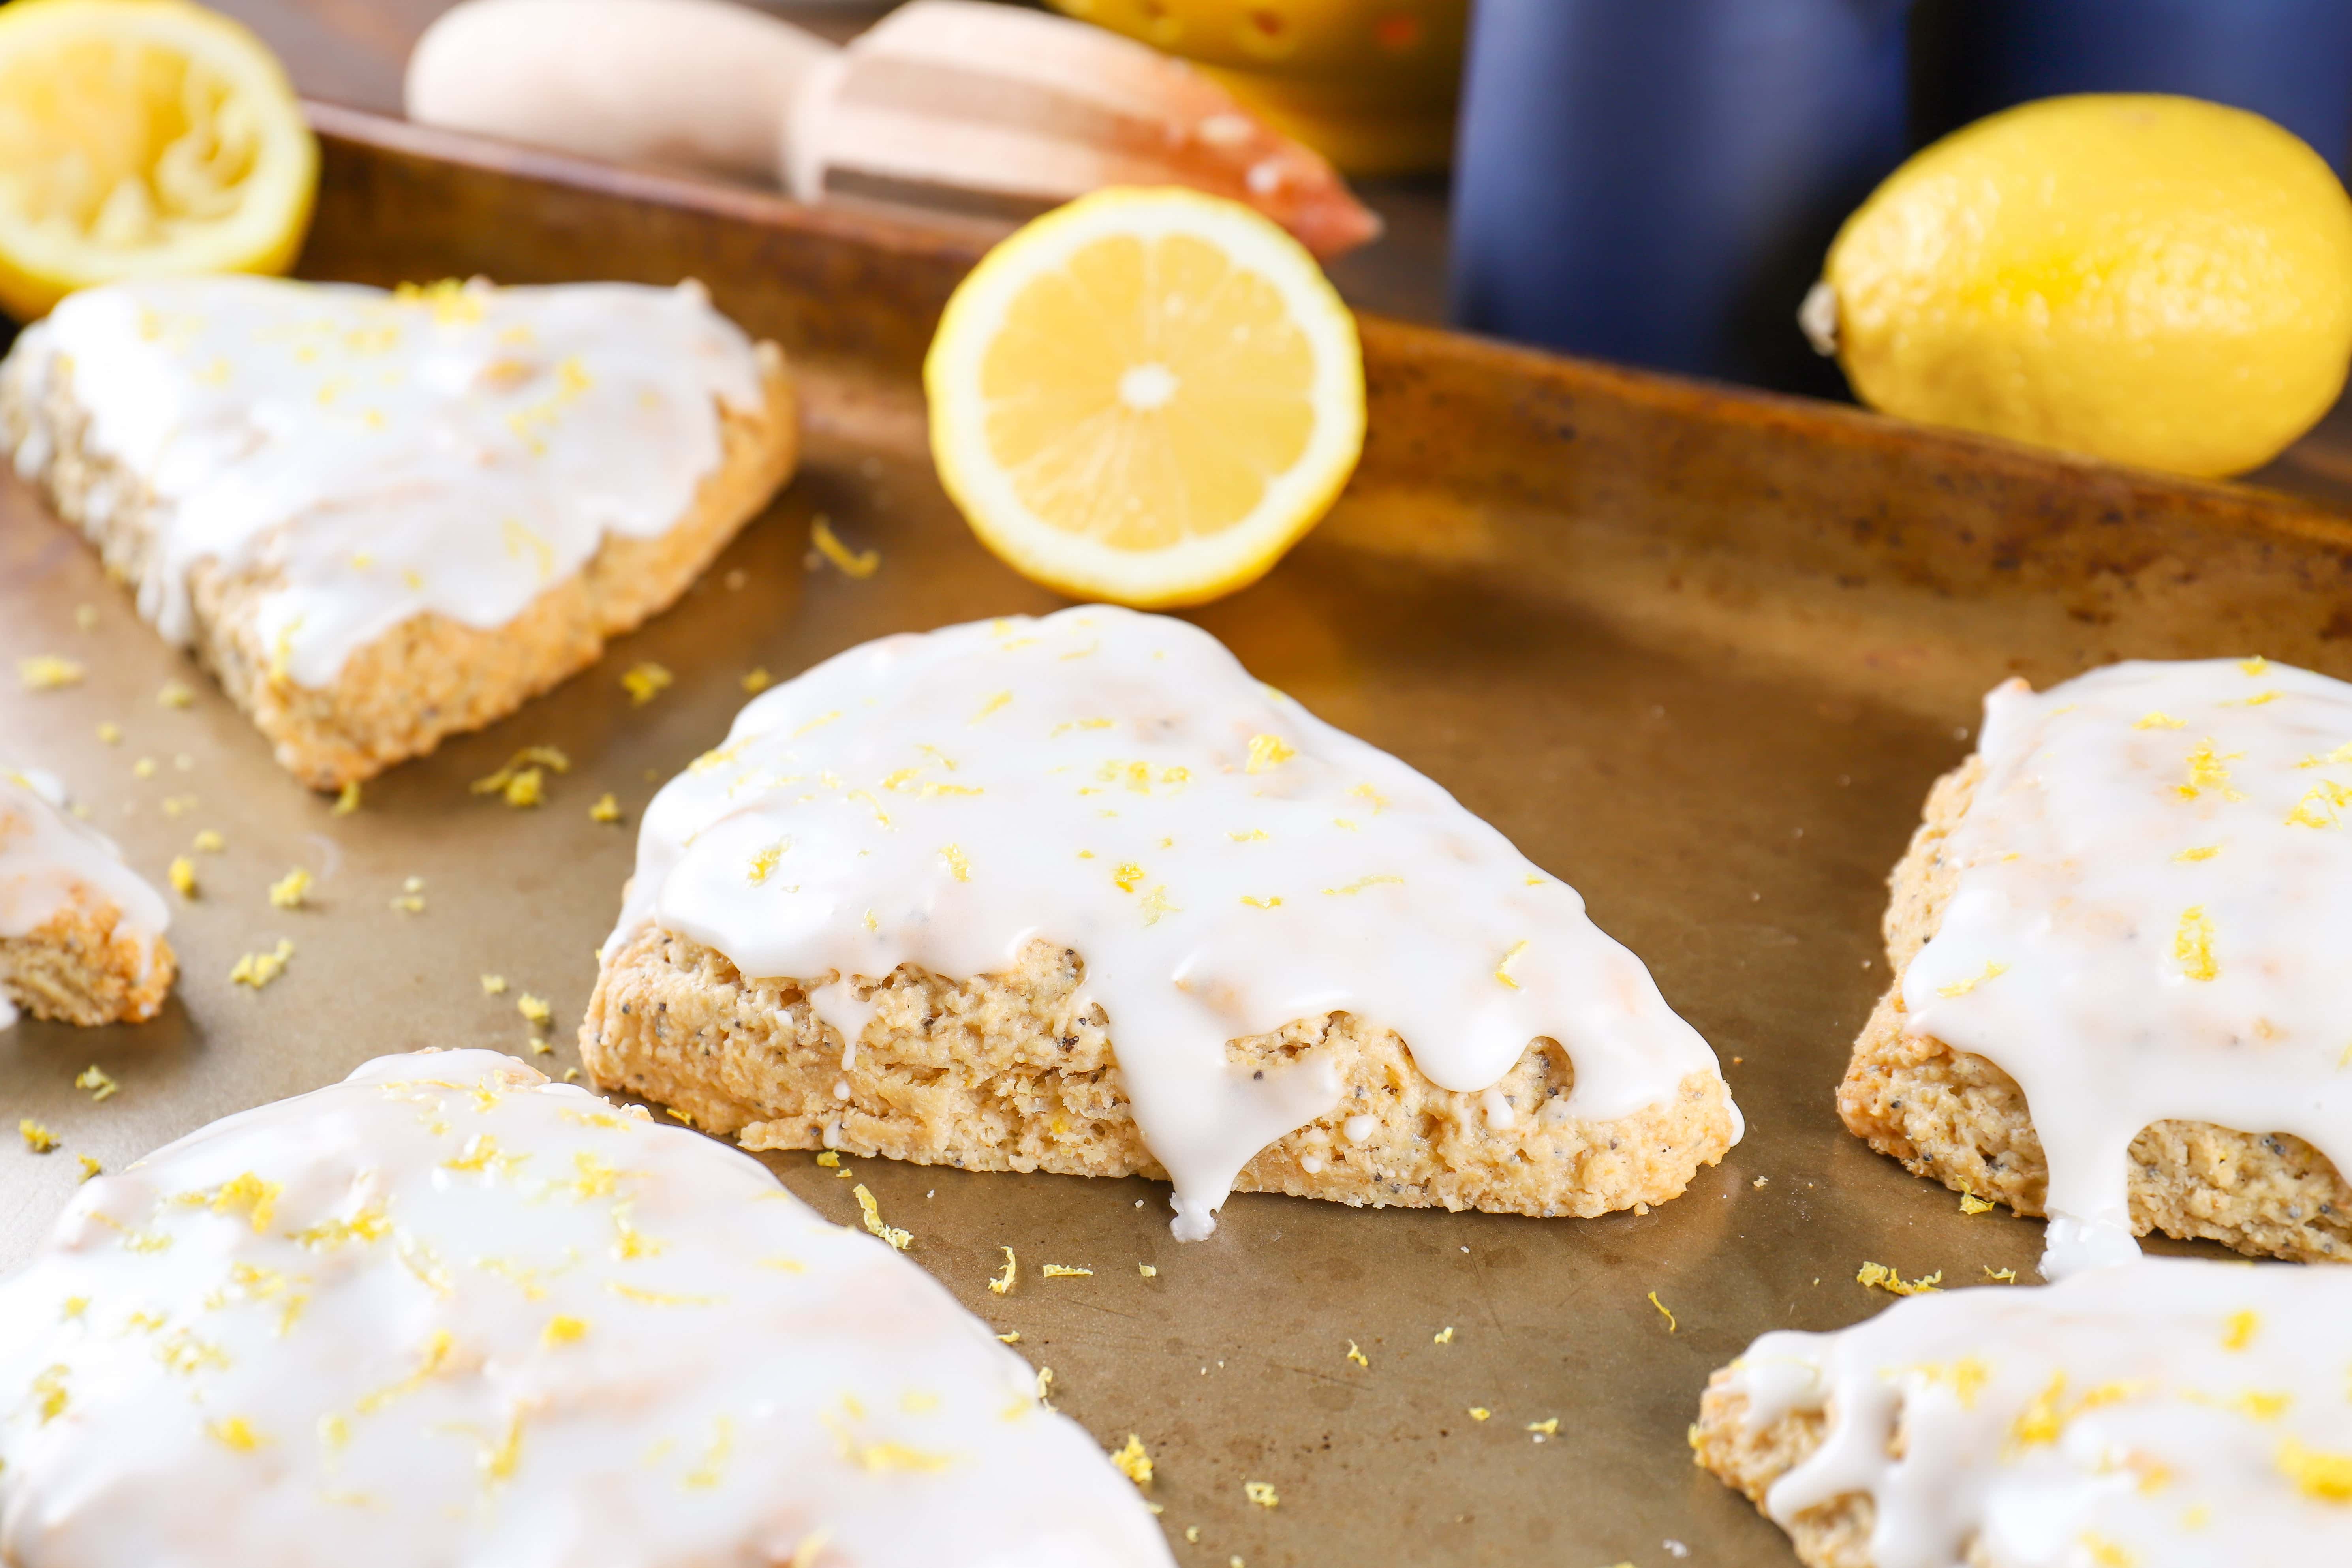 Lemon Poppy Seed Scone glazed and topped with fresh lemon zest. Recipe from A Kitchen Addiction